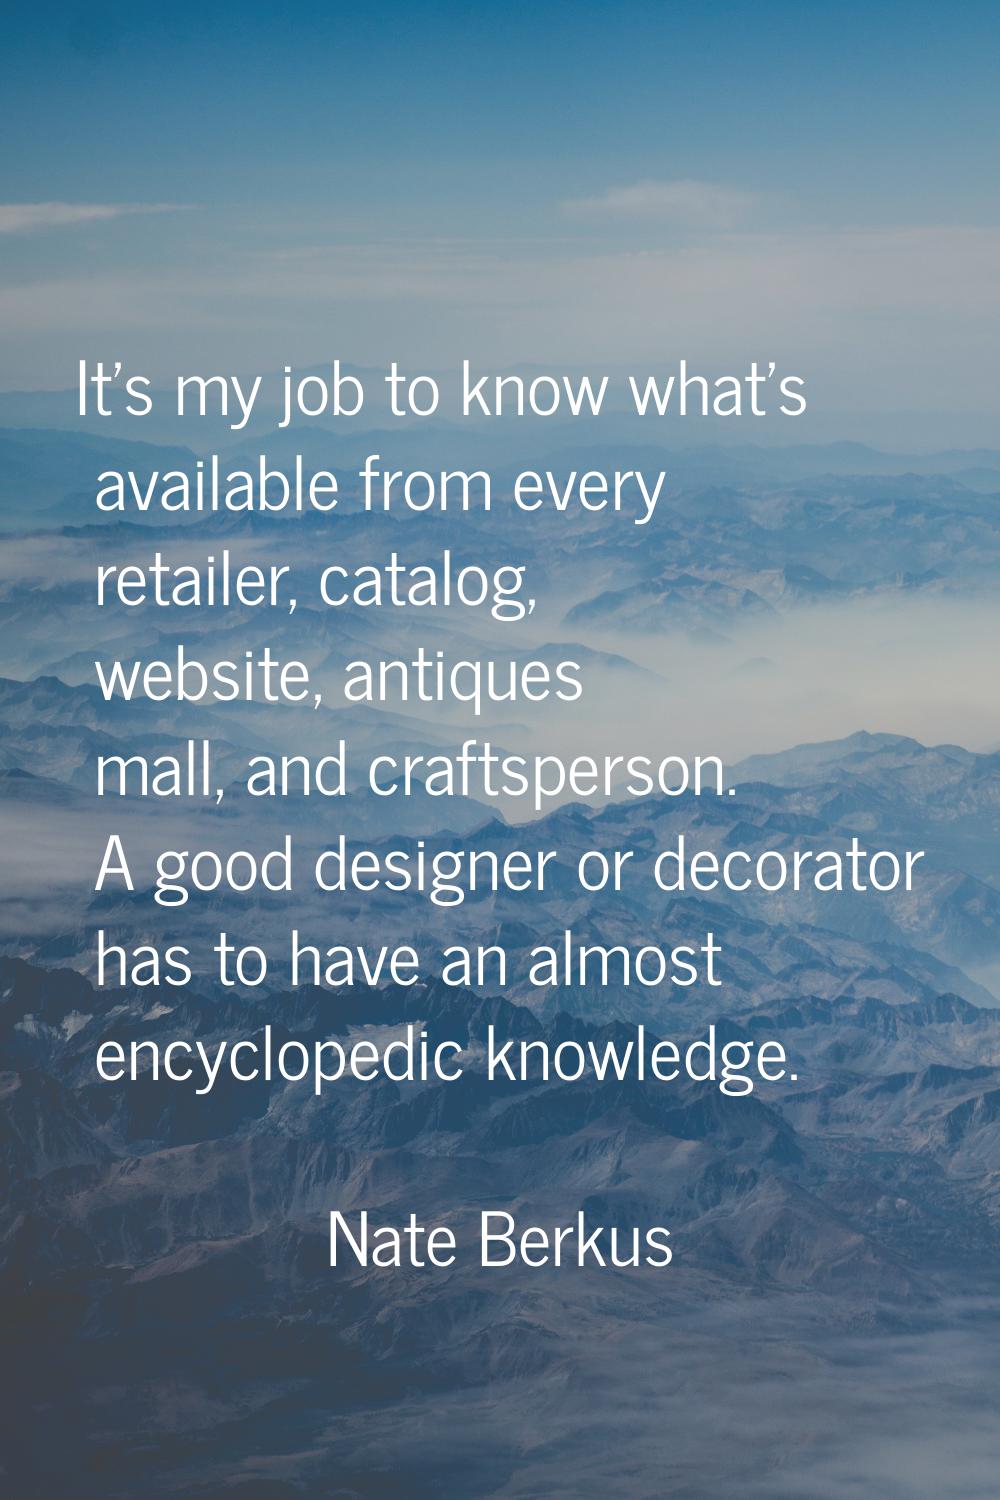 It's my job to know what's available from every retailer, catalog, website, antiques mall, and craf